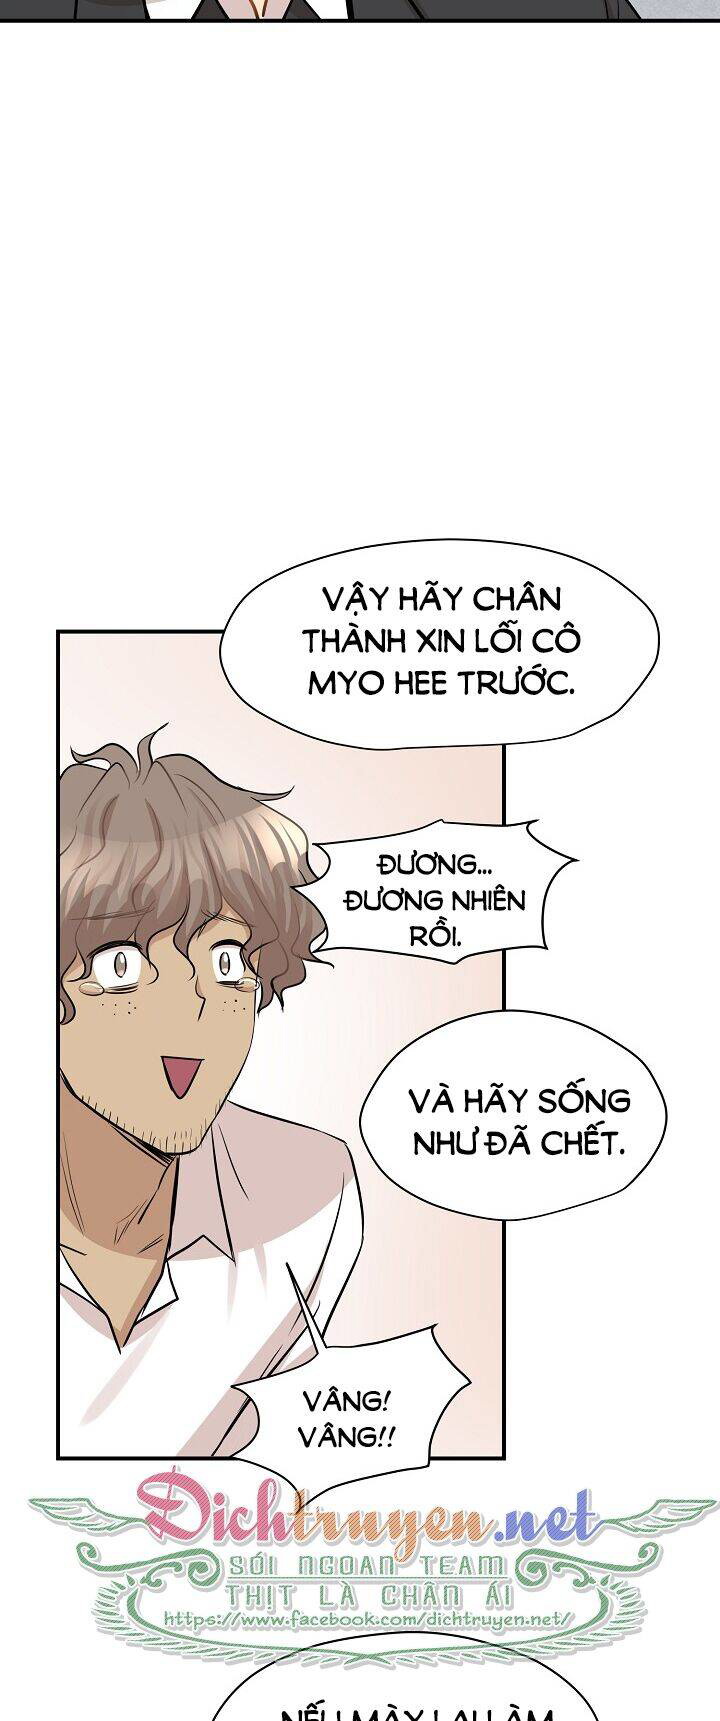 cuoc-song-ky-thu-chap-39-50